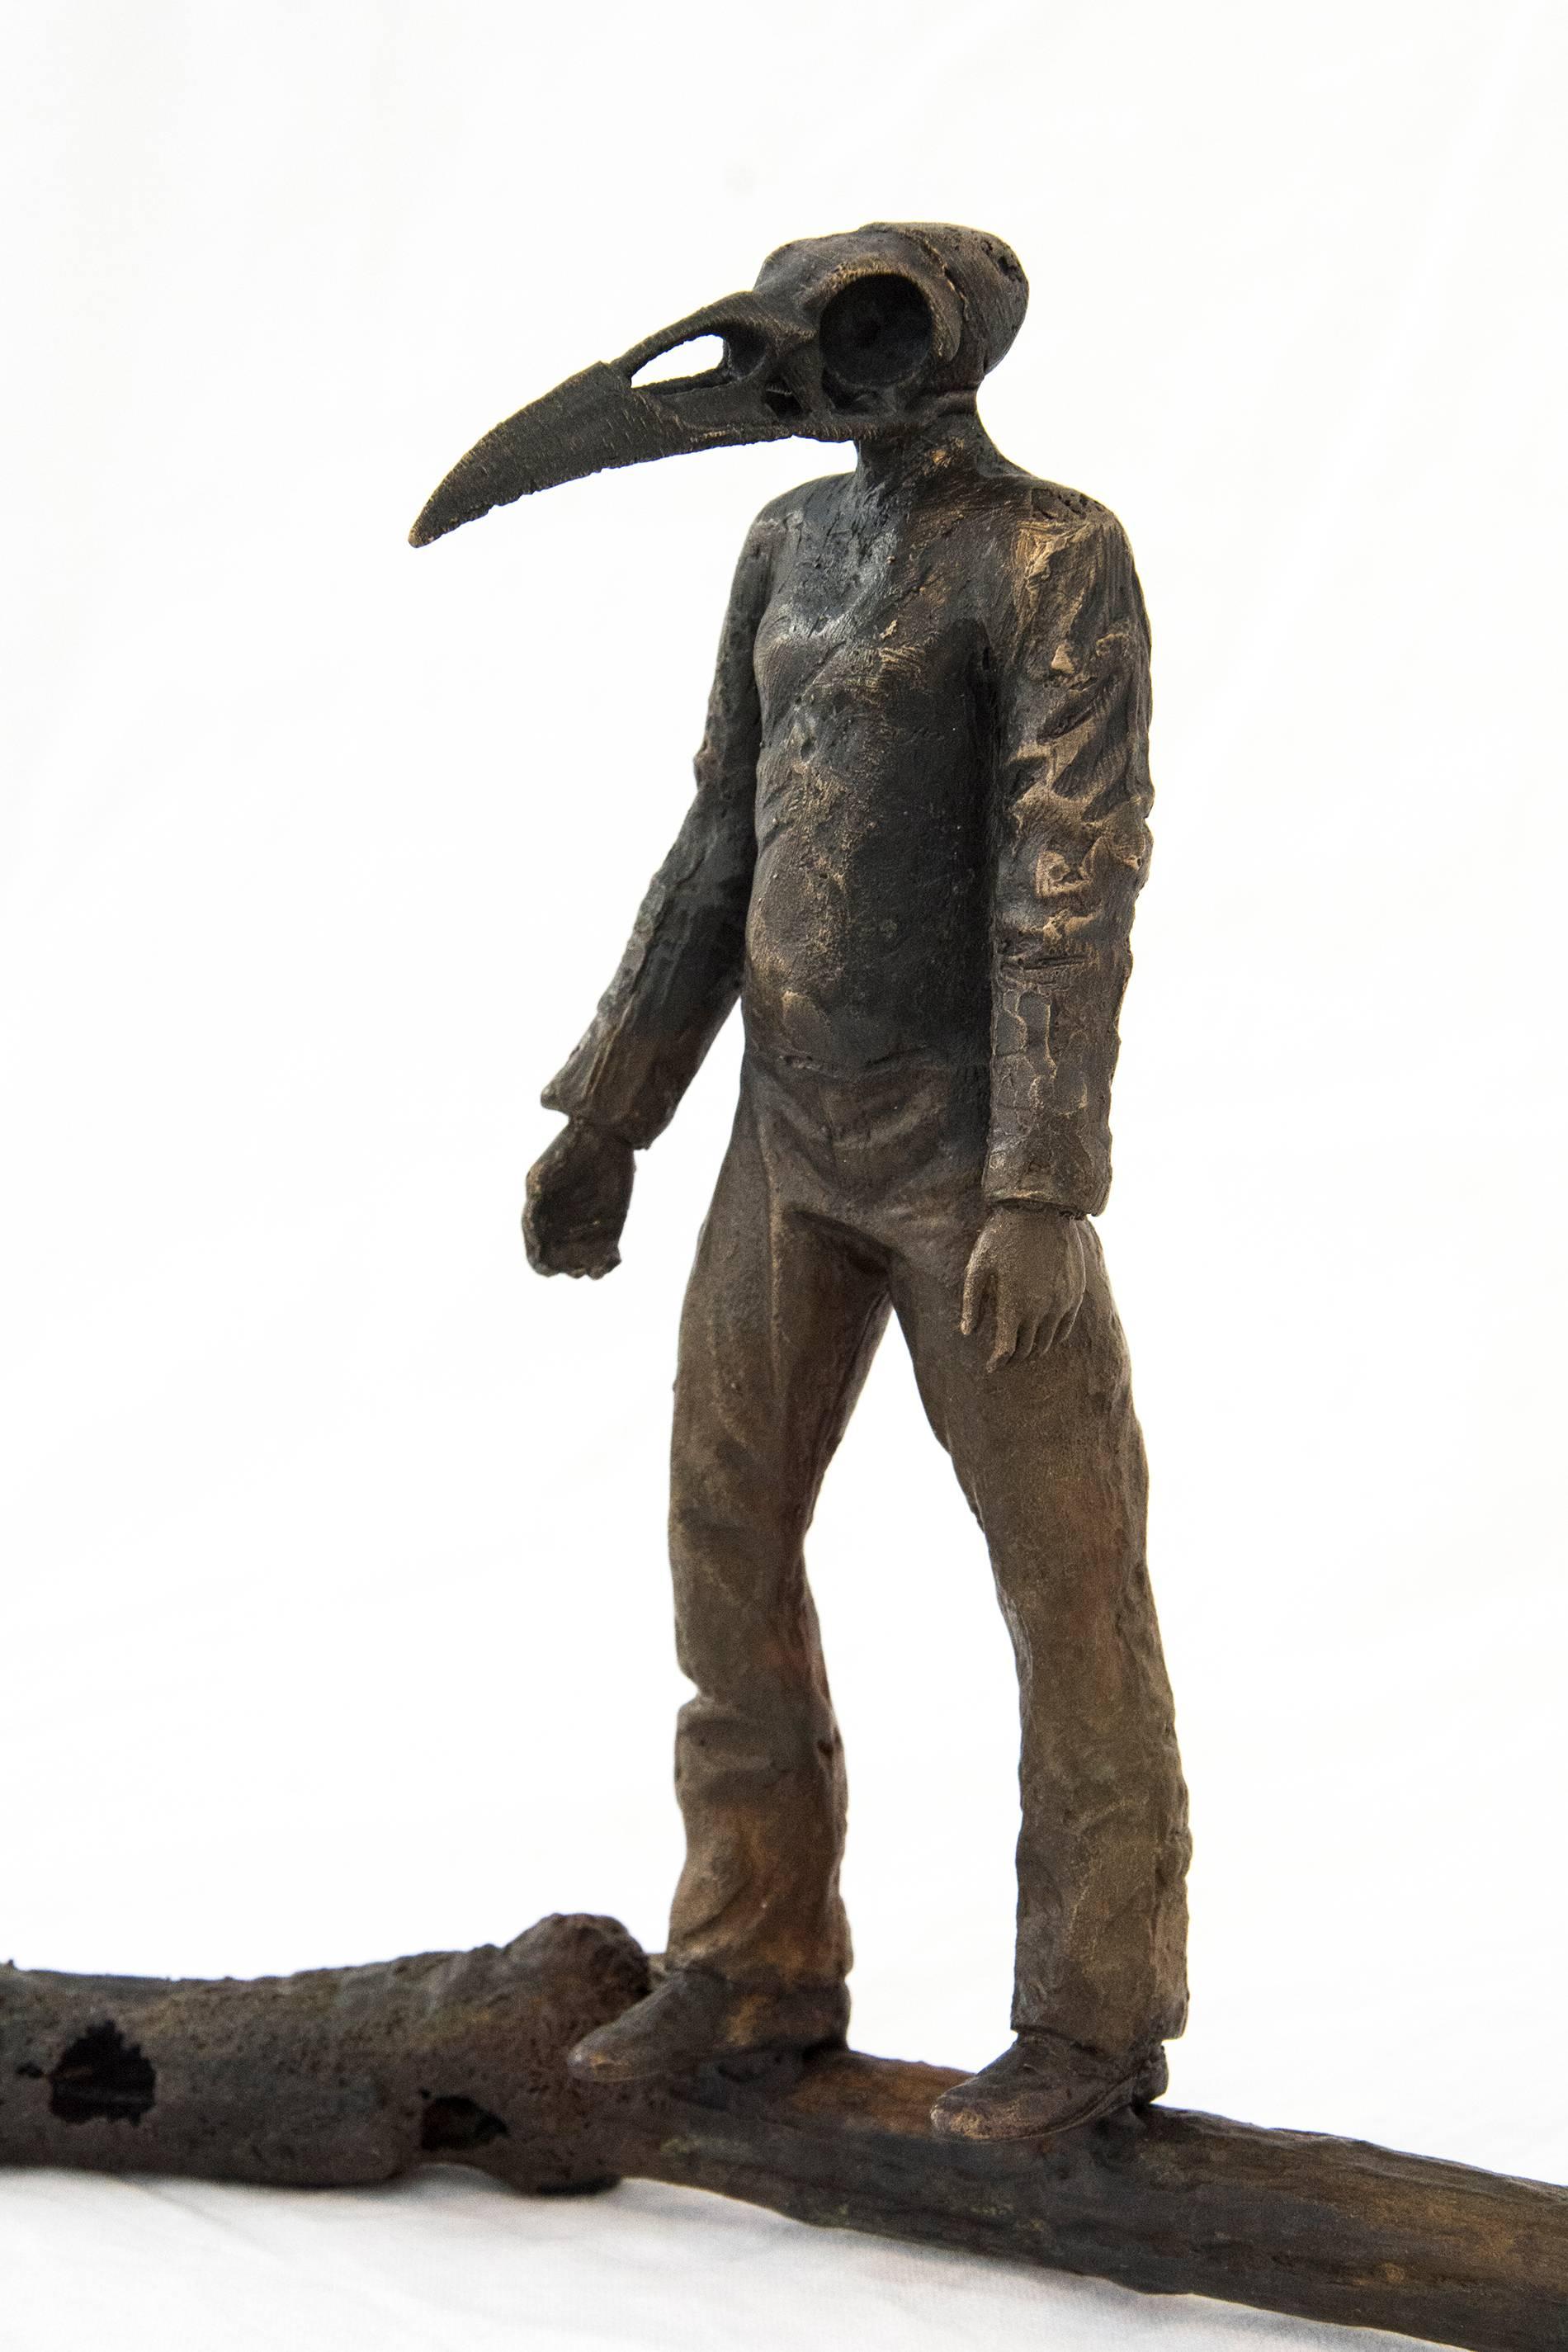 Roch Smith Figurative Sculpture - Ravenskull: Consideration of a Balancing Act